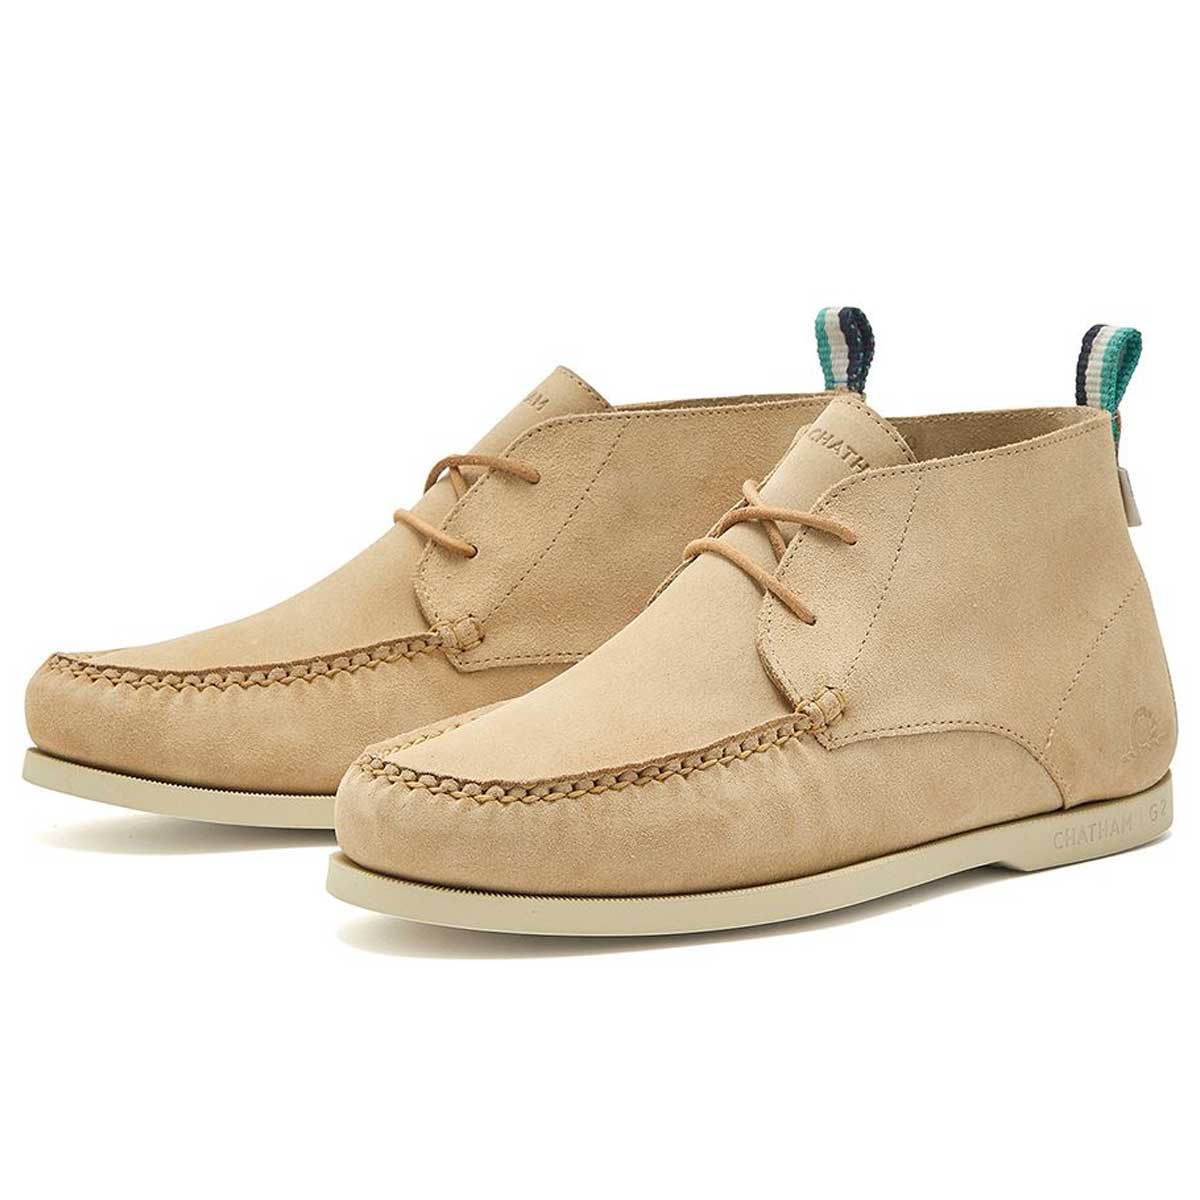 CHATHAM Ives Repello Suede G2 Boat Chukka Boots - Men's - Sand